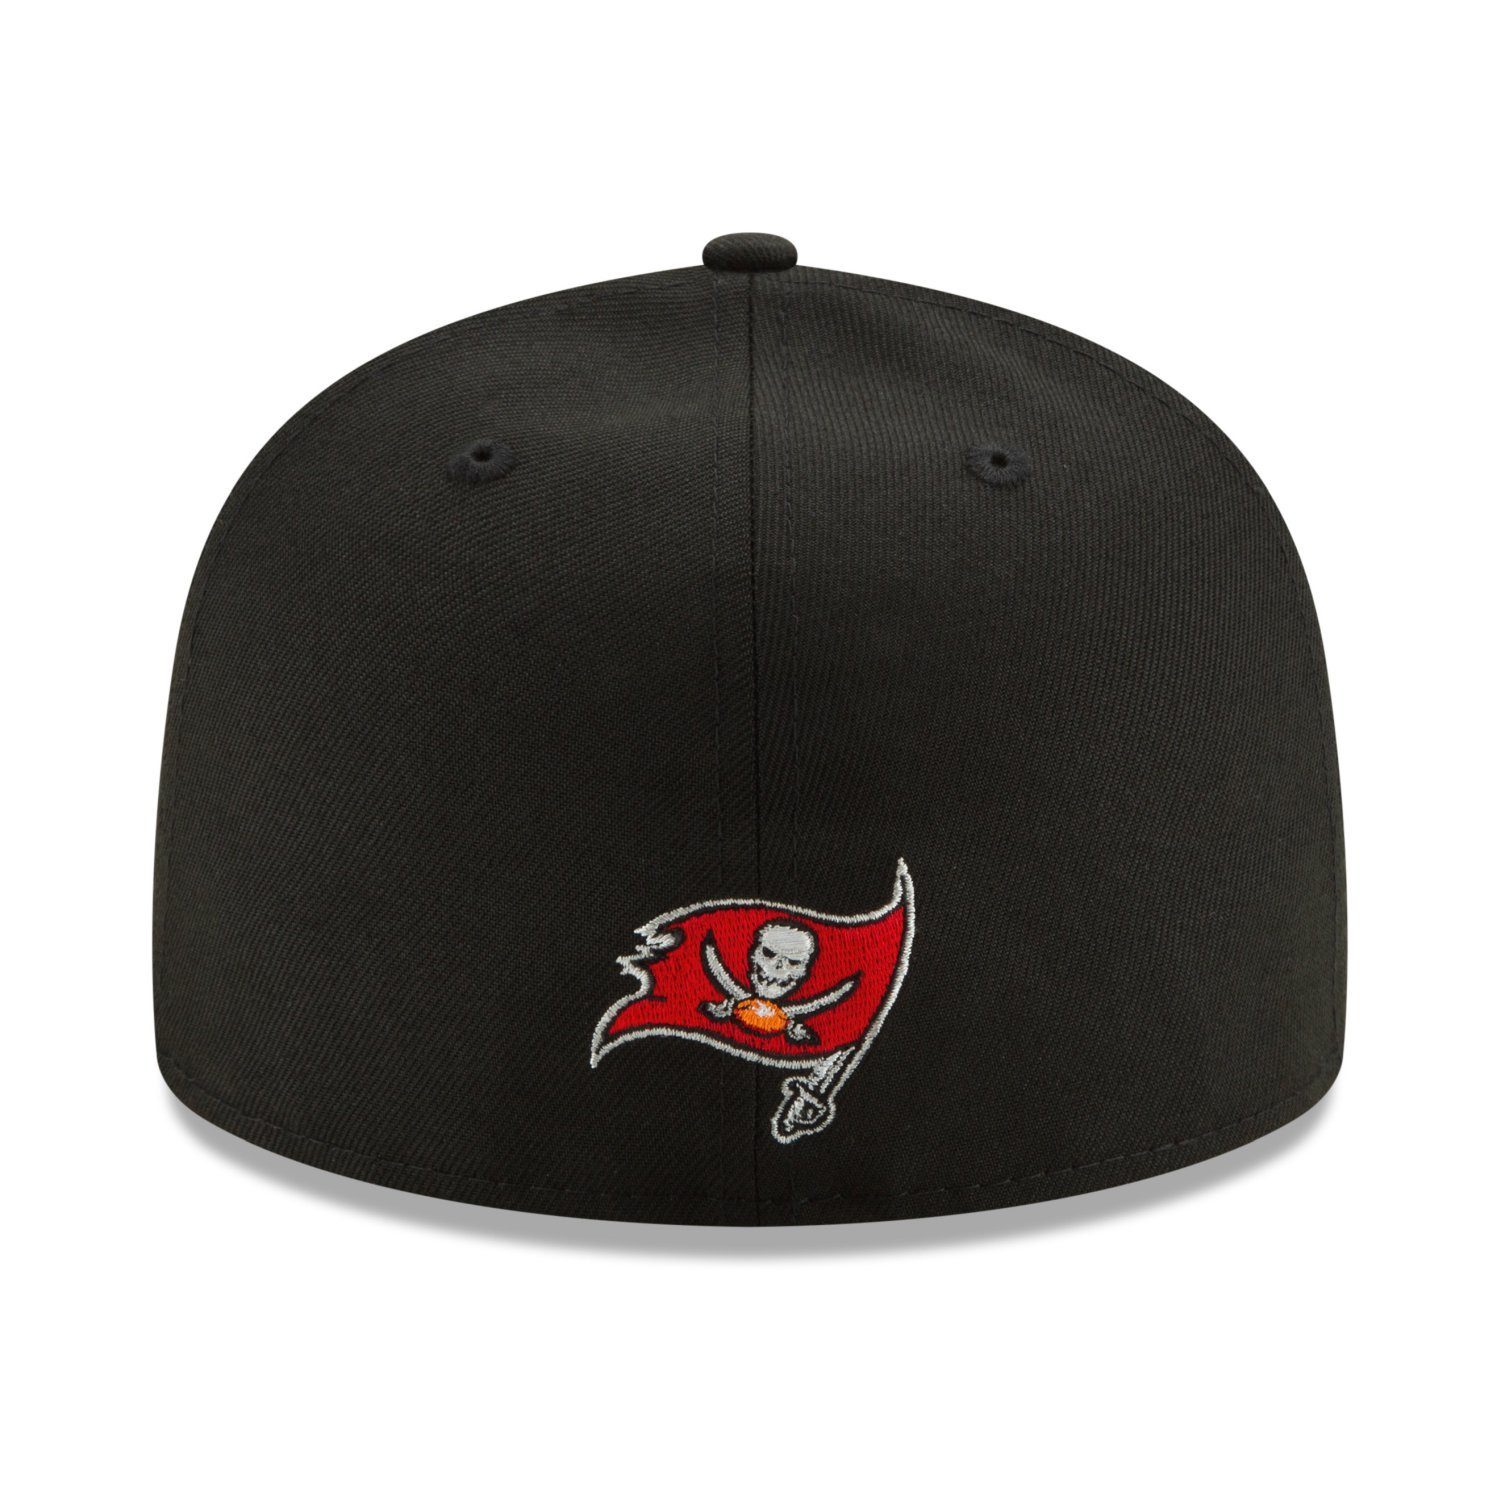 New ELEMENTS Cap Tampa Fitted 59Fifty 2.0 NFL Era Buccaneers Bay